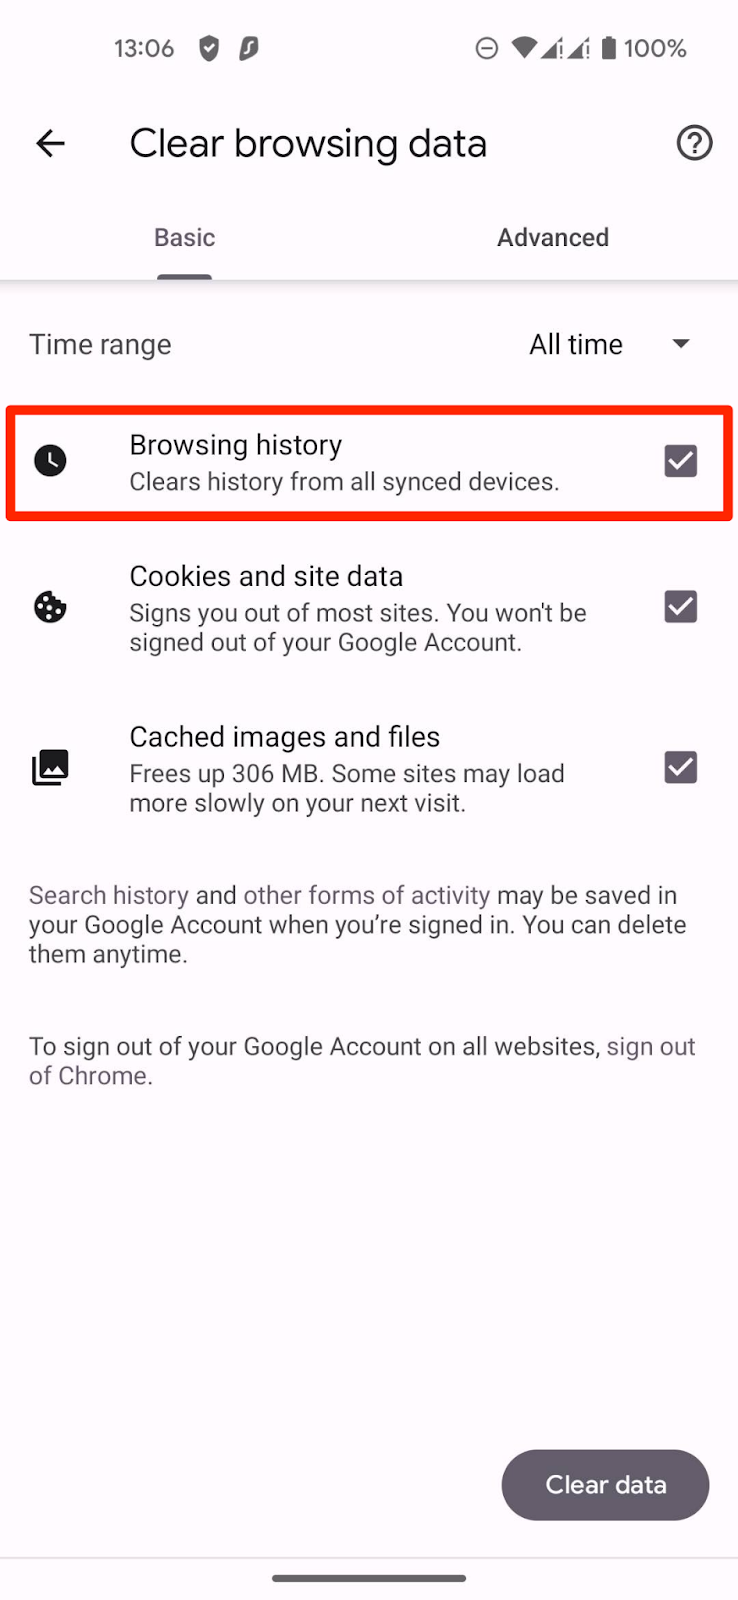 Enable the "Browsing history" box.